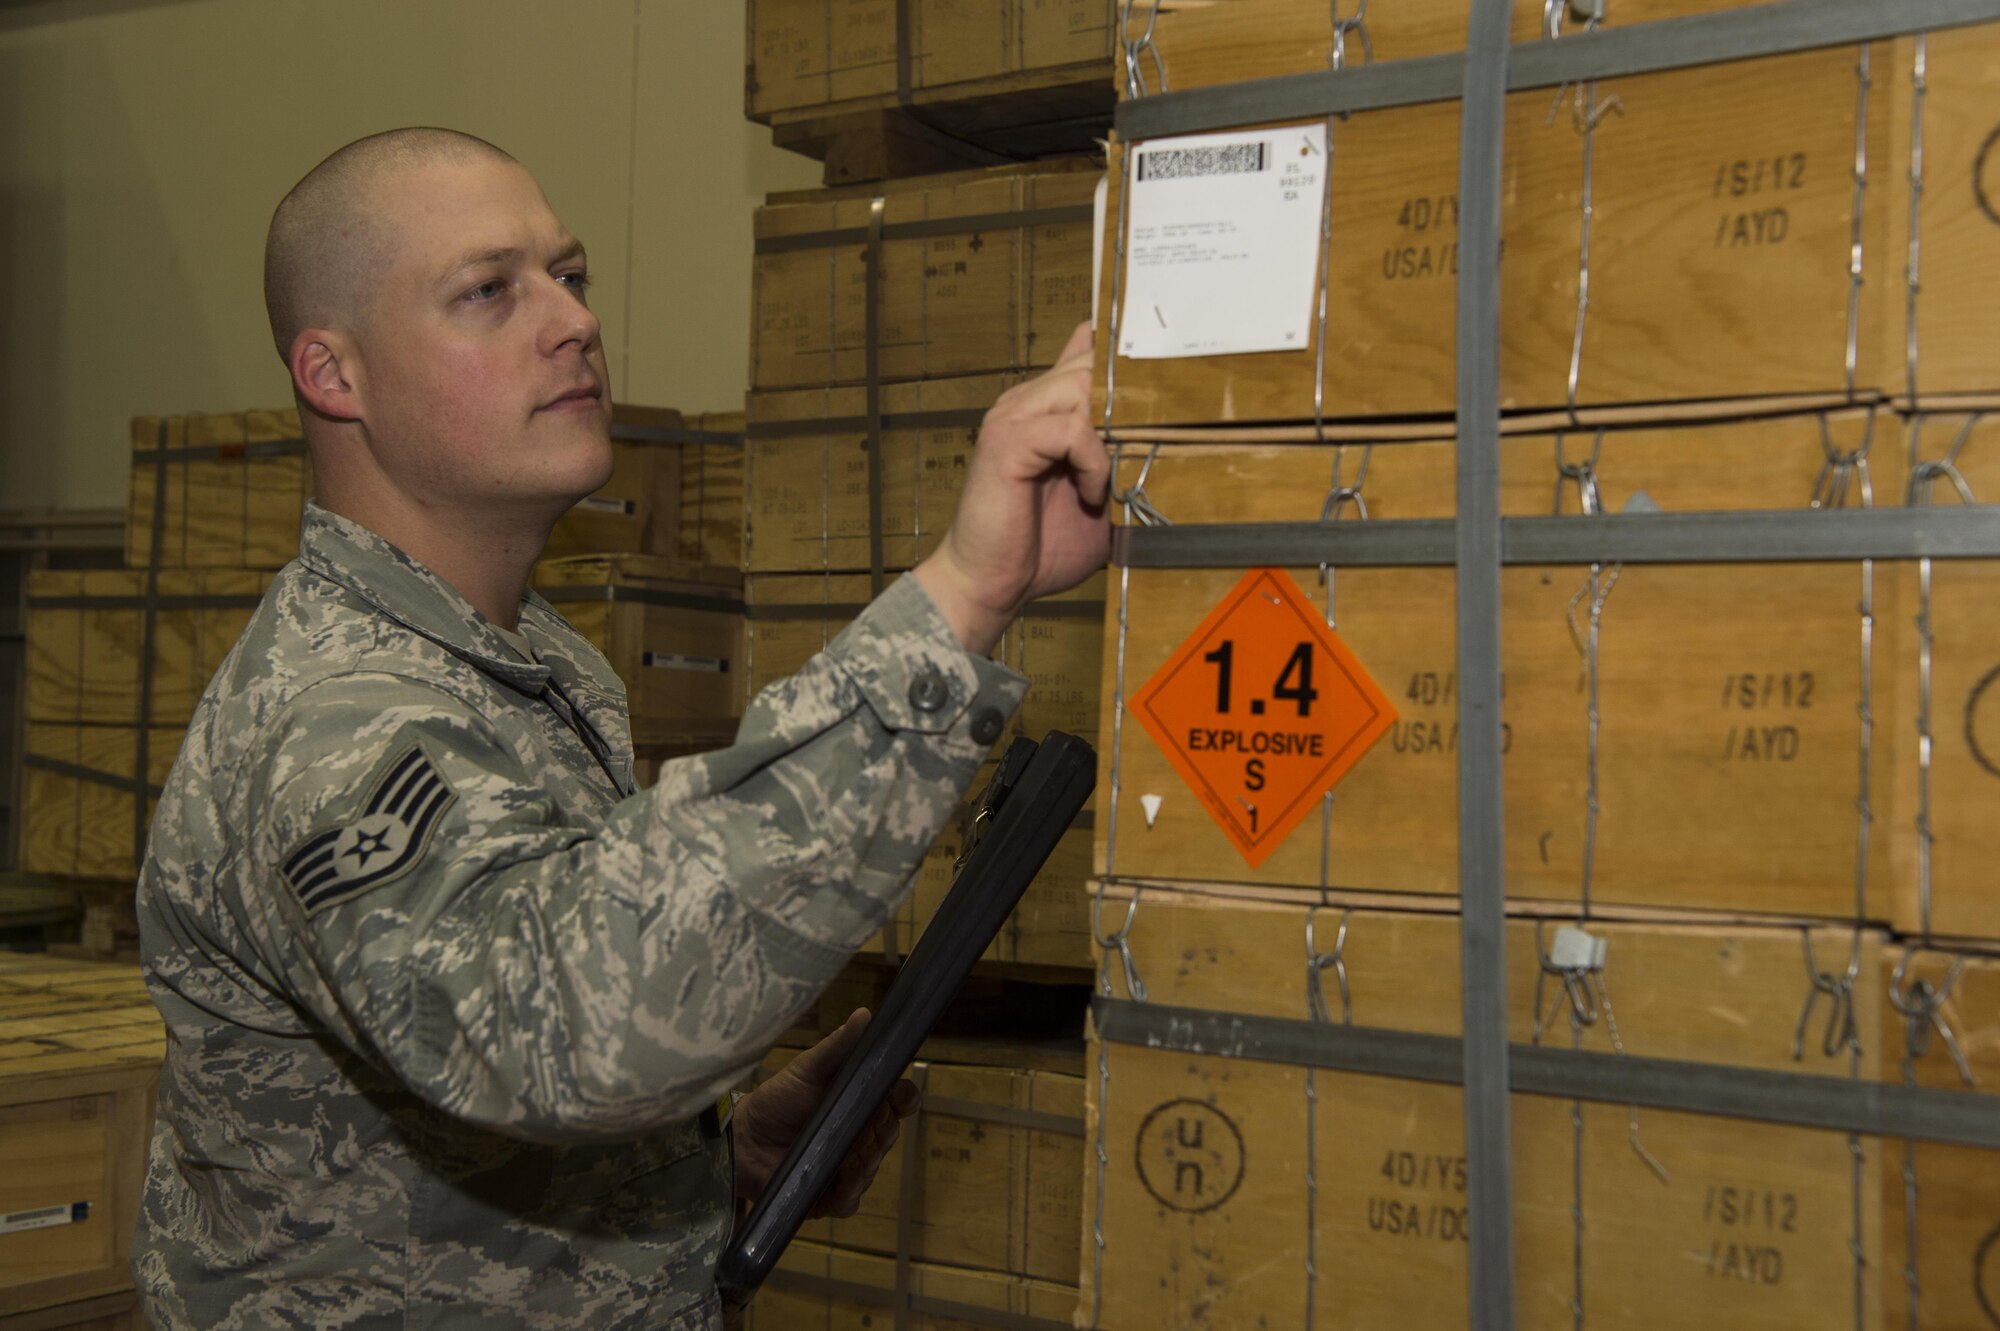 Staff Sgt. Bryan Thompson, 90th Munition Squadron munitions operations NCO in charge, inventories ammunition at F.E. Warren Air Force Base, Wyo., Oct. 31, 2016. Thompson is in charge of acquiring and inventorying every munition asset delivered to the base. The 90th MUNS mission is to enable nuclear deterrence by maintaining combat ready munitions in defense of global freedoms safely, securely and effectively. (U.S. Air Force photo by Staff Sgt. Christopher Ruano)